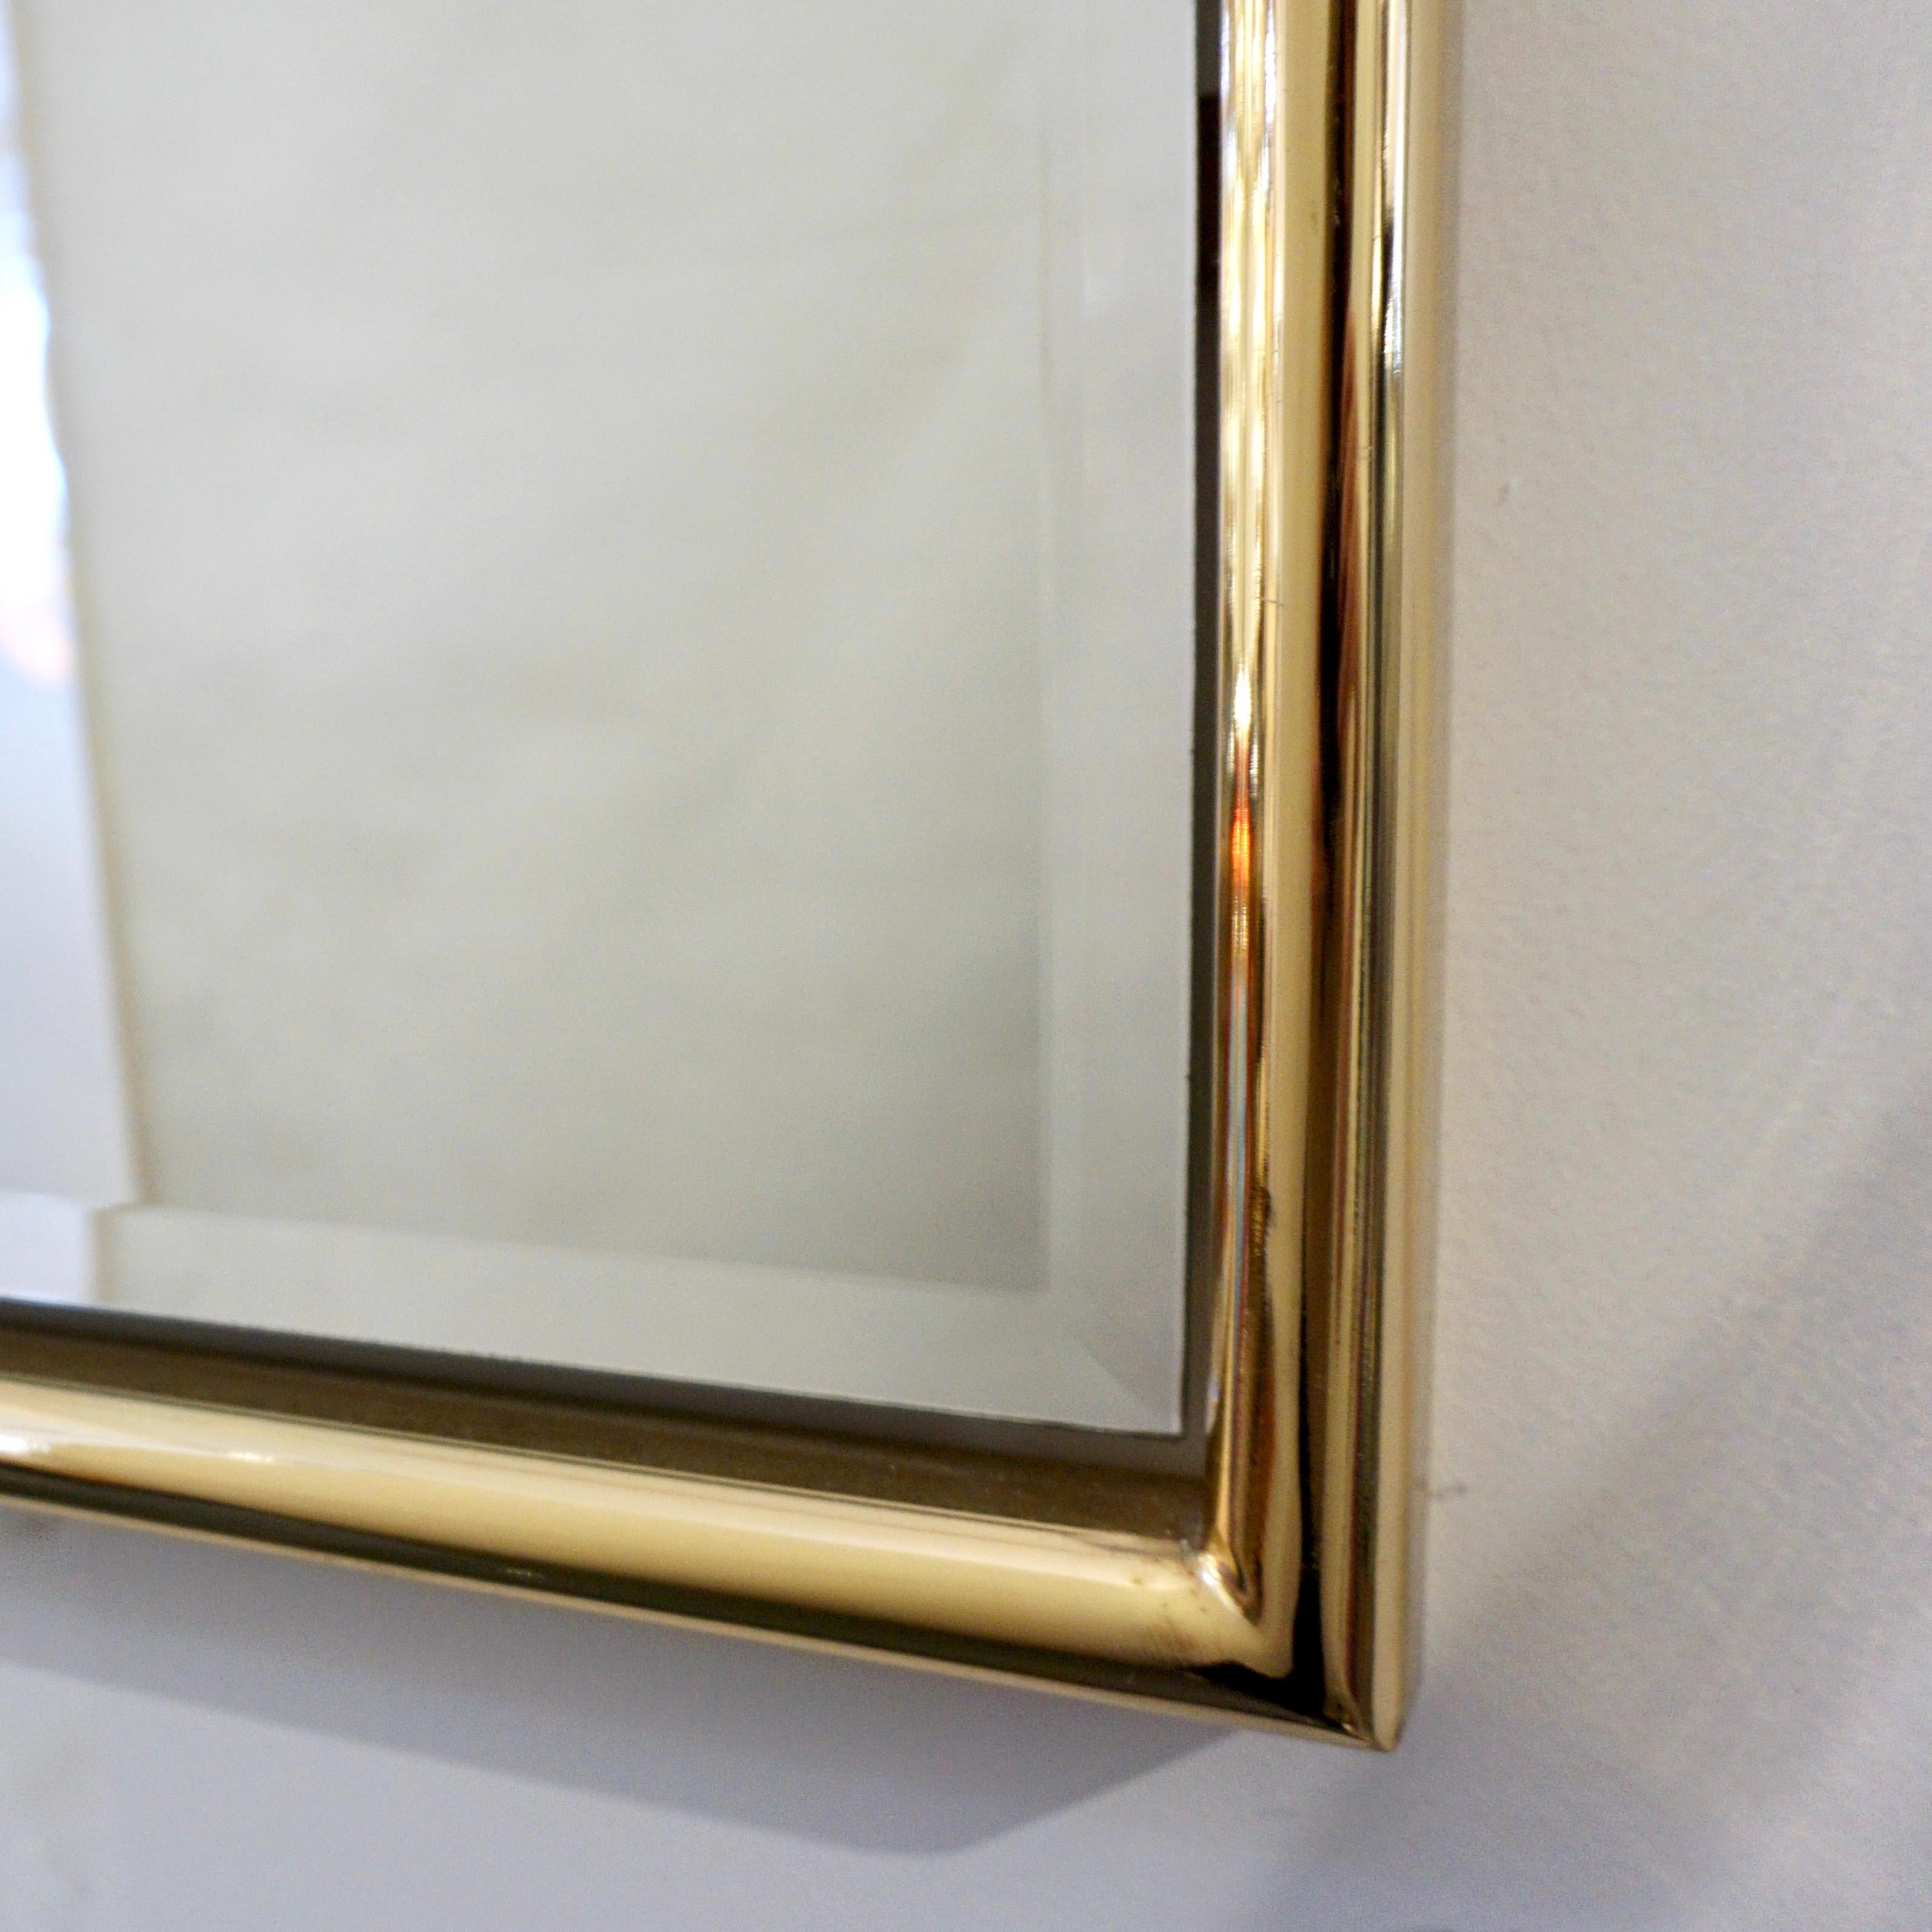 1960s Italian Minimalist Brass Full Floating Mirror with Round Arched Top Frame For Sale 5